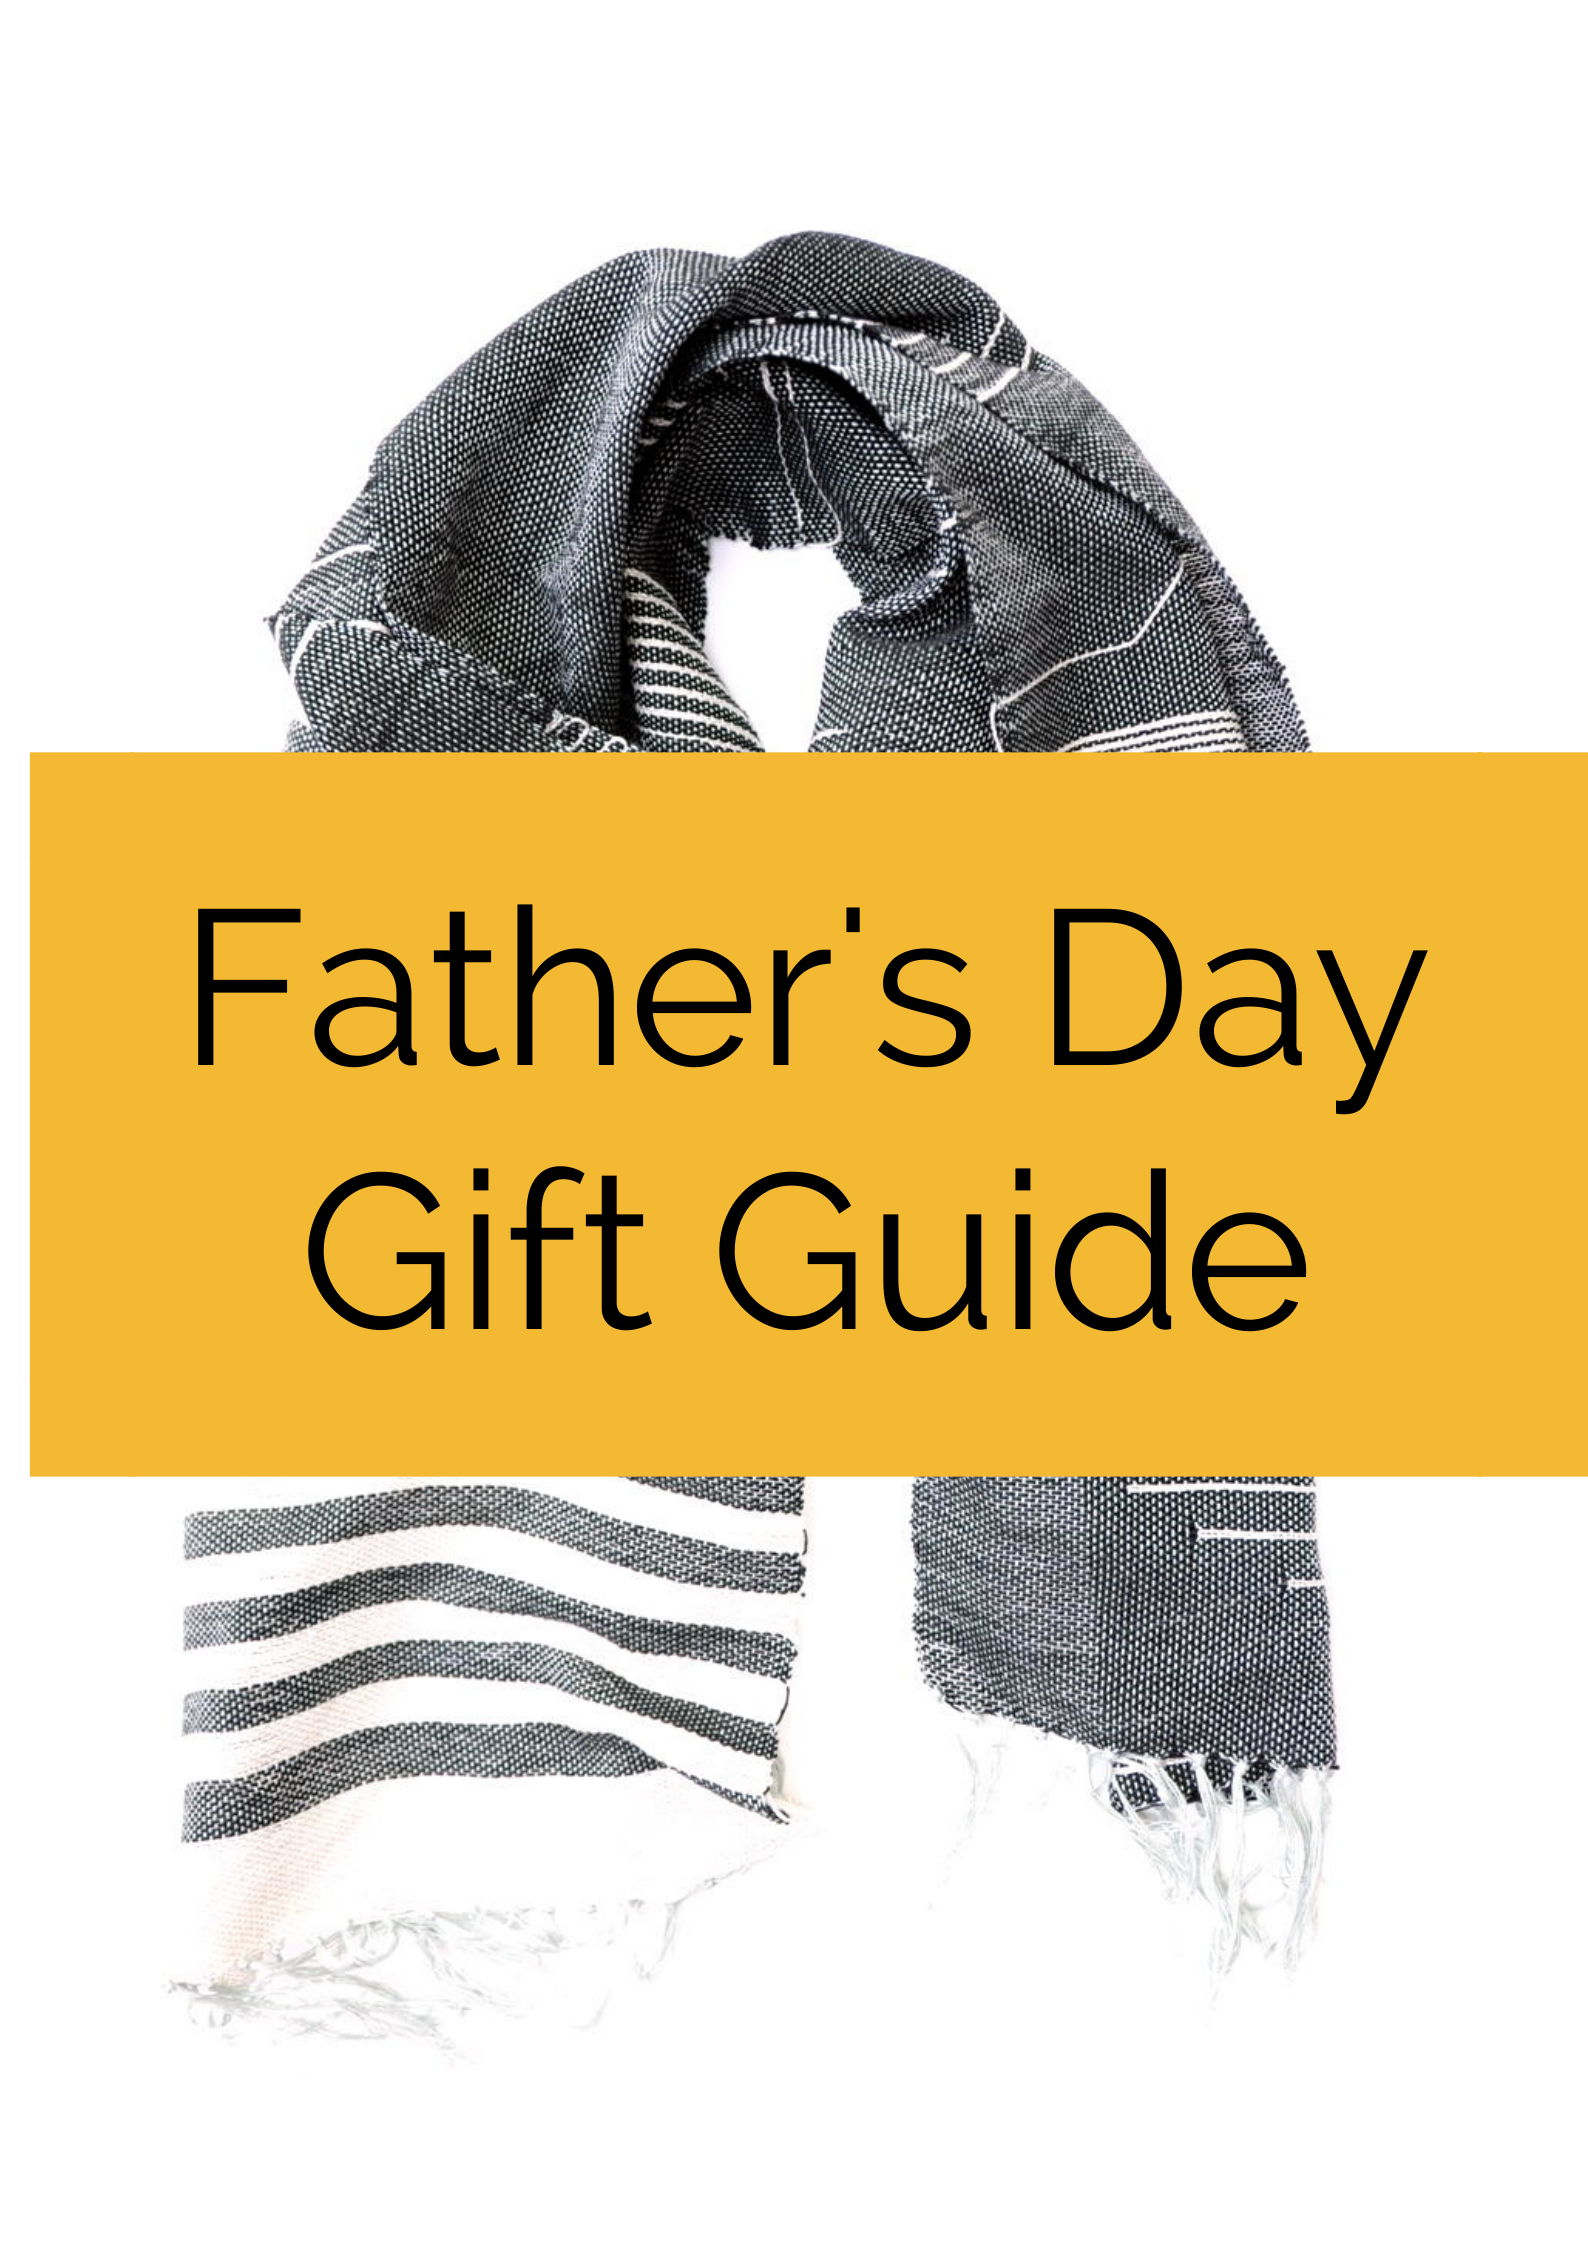 Father's Day Gift Guide For the stylish dad